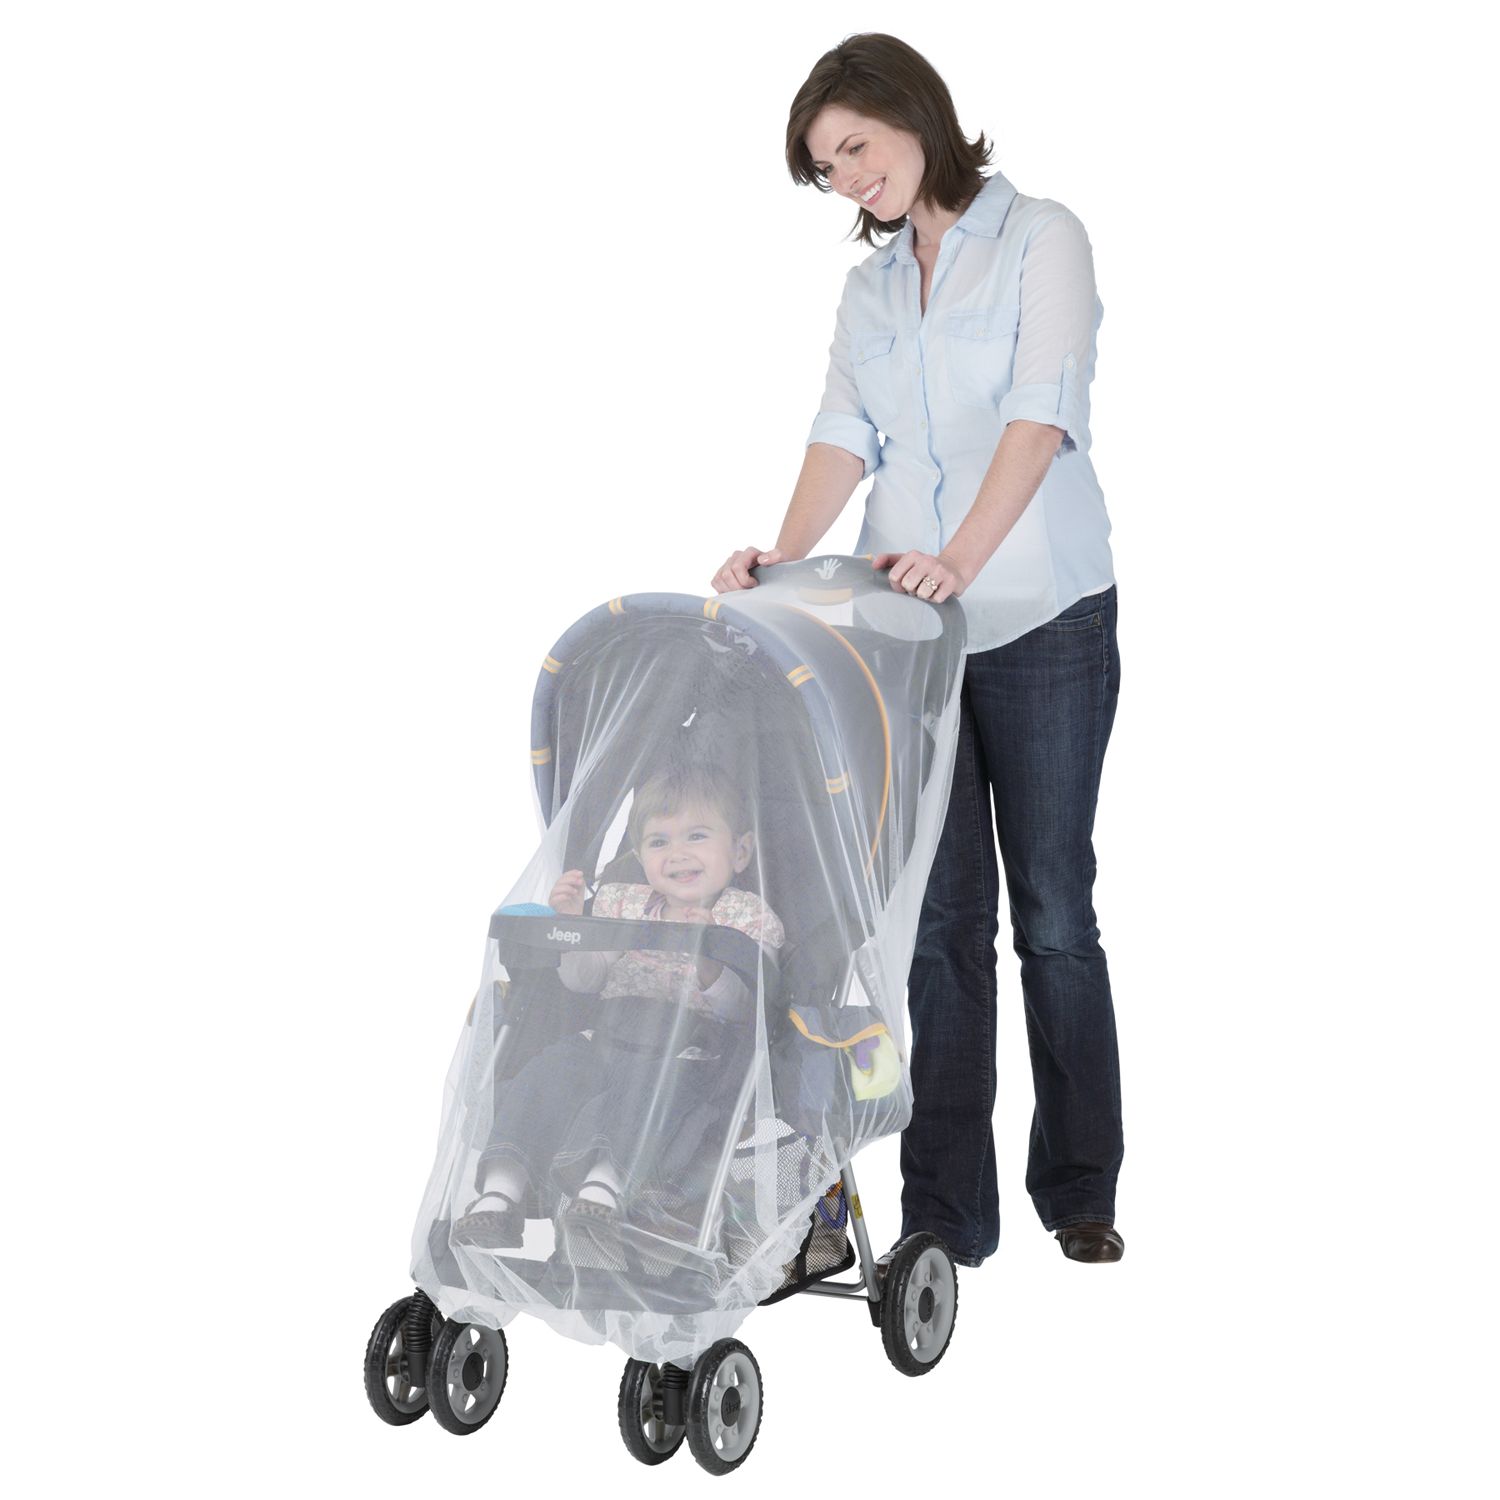 j is for jeep stroller